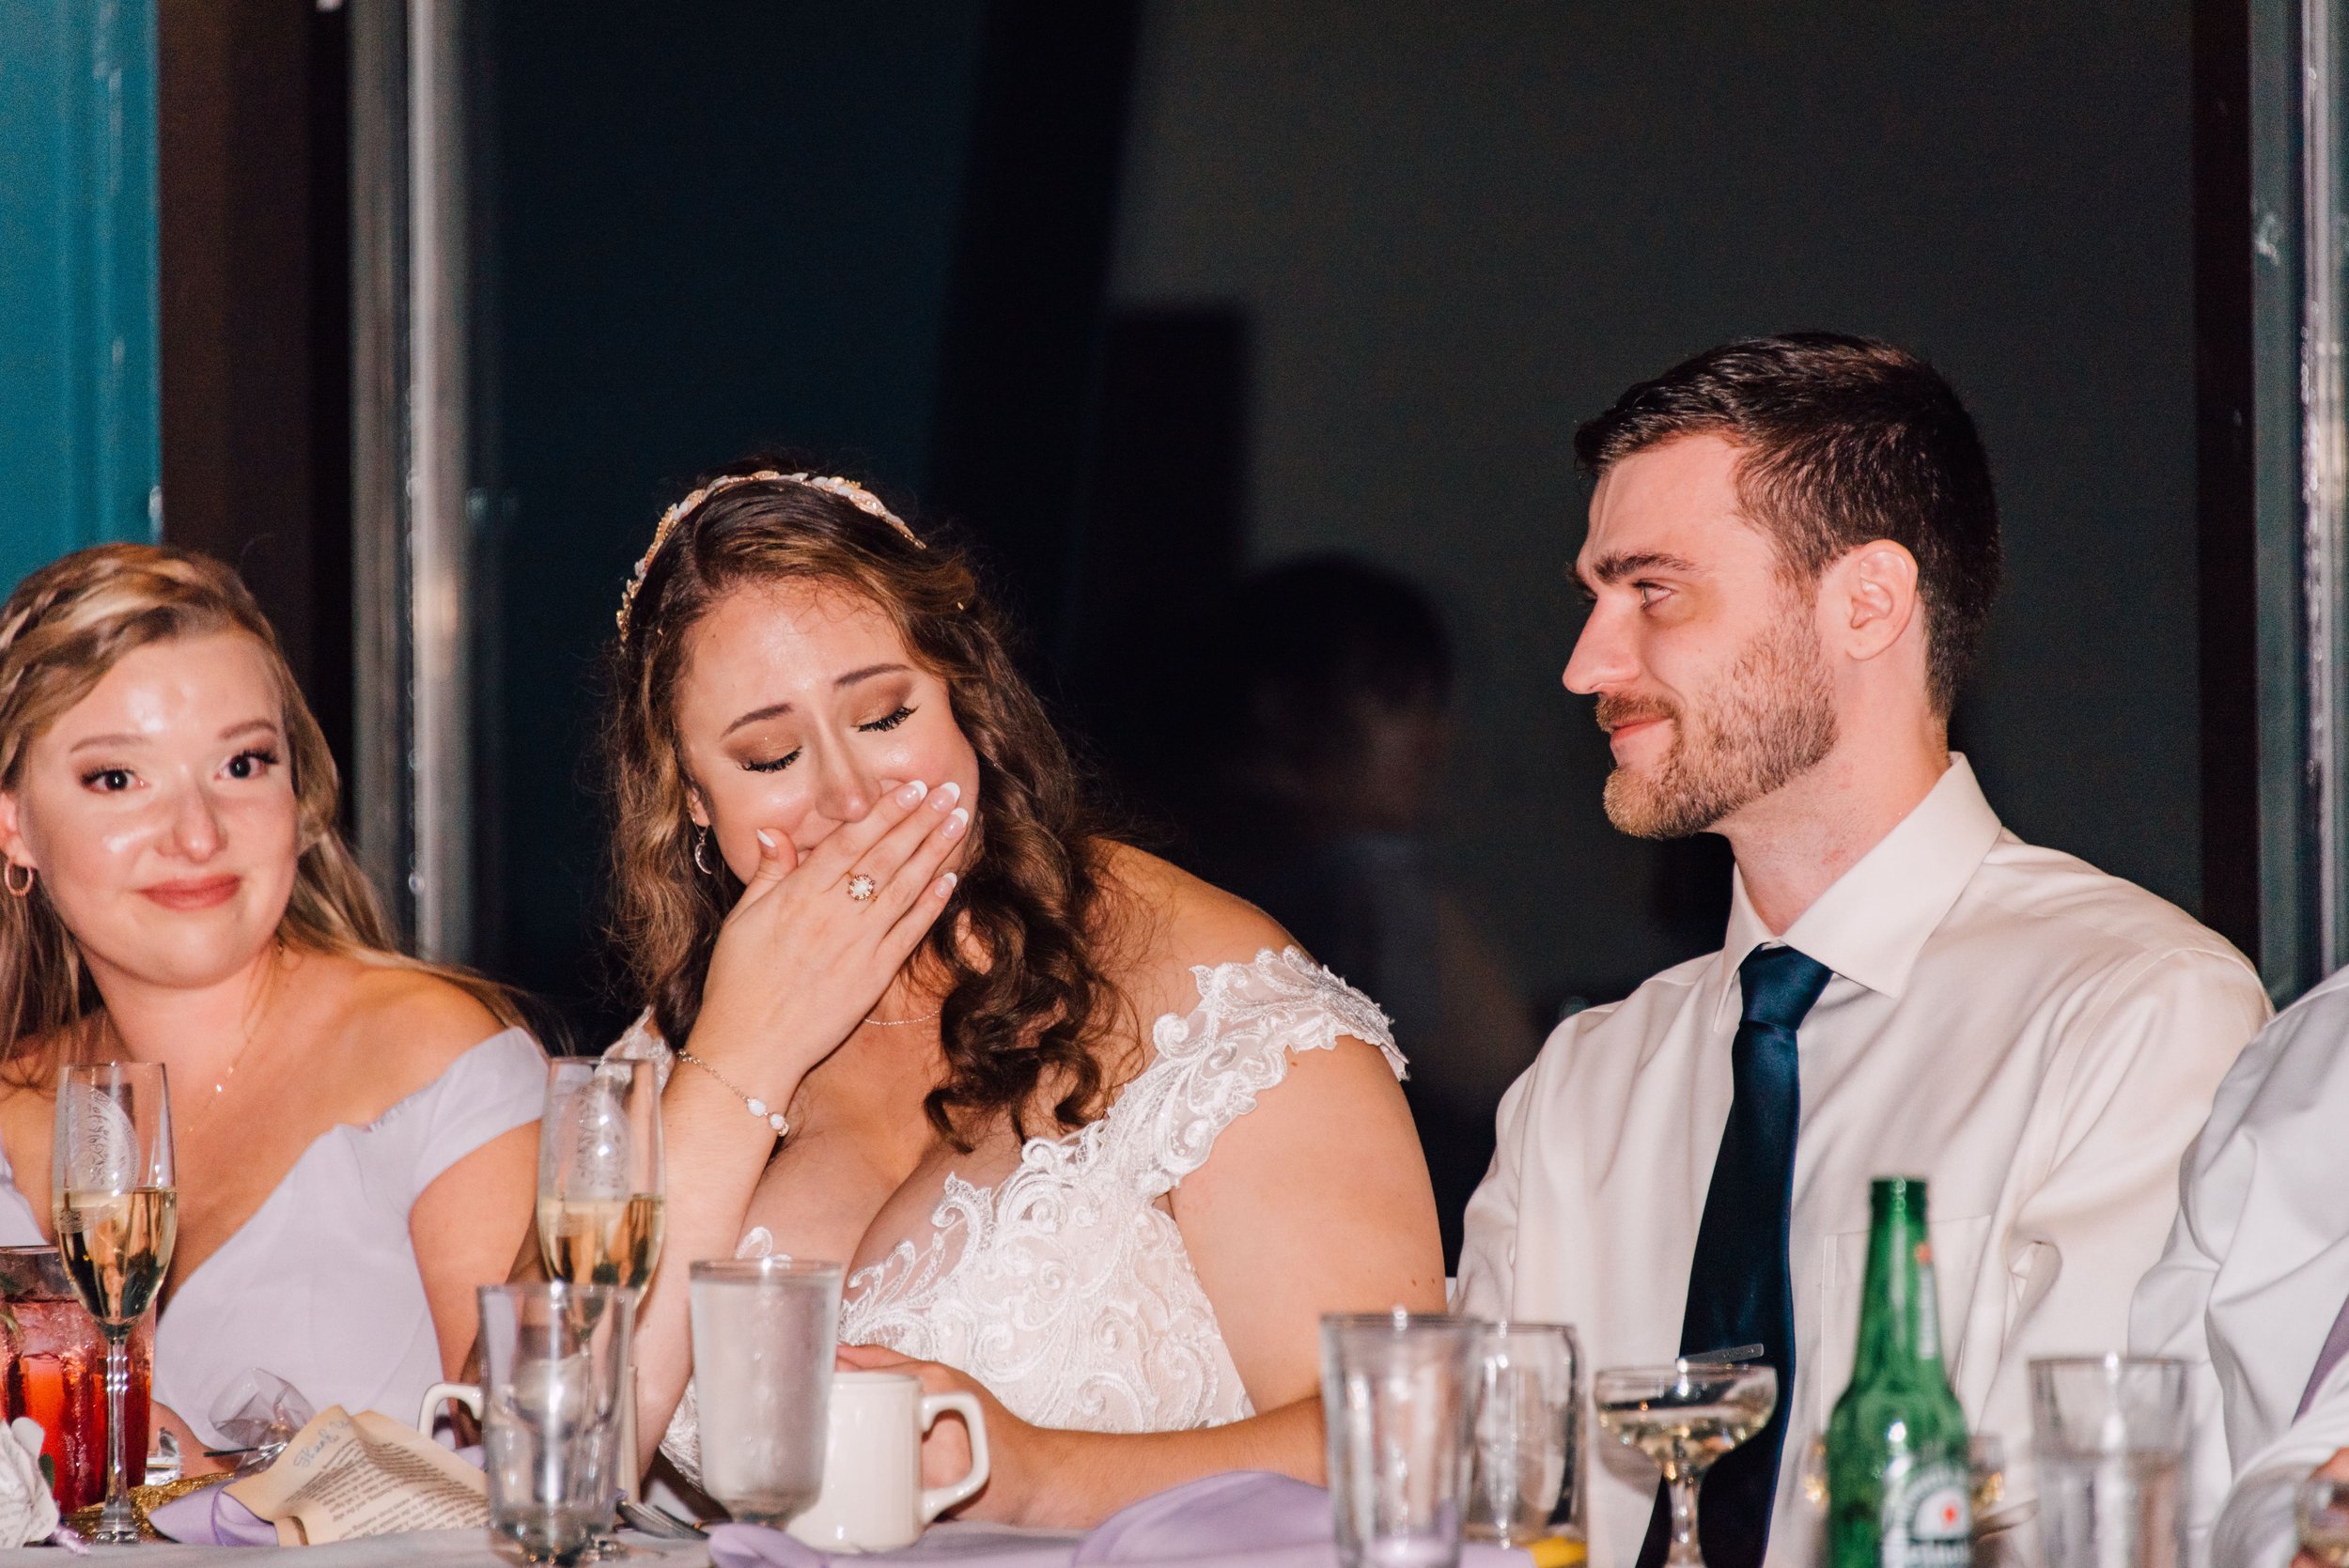  the bride and groom get emotional as a guest gives a speech during their wedding reception at endwell greens 